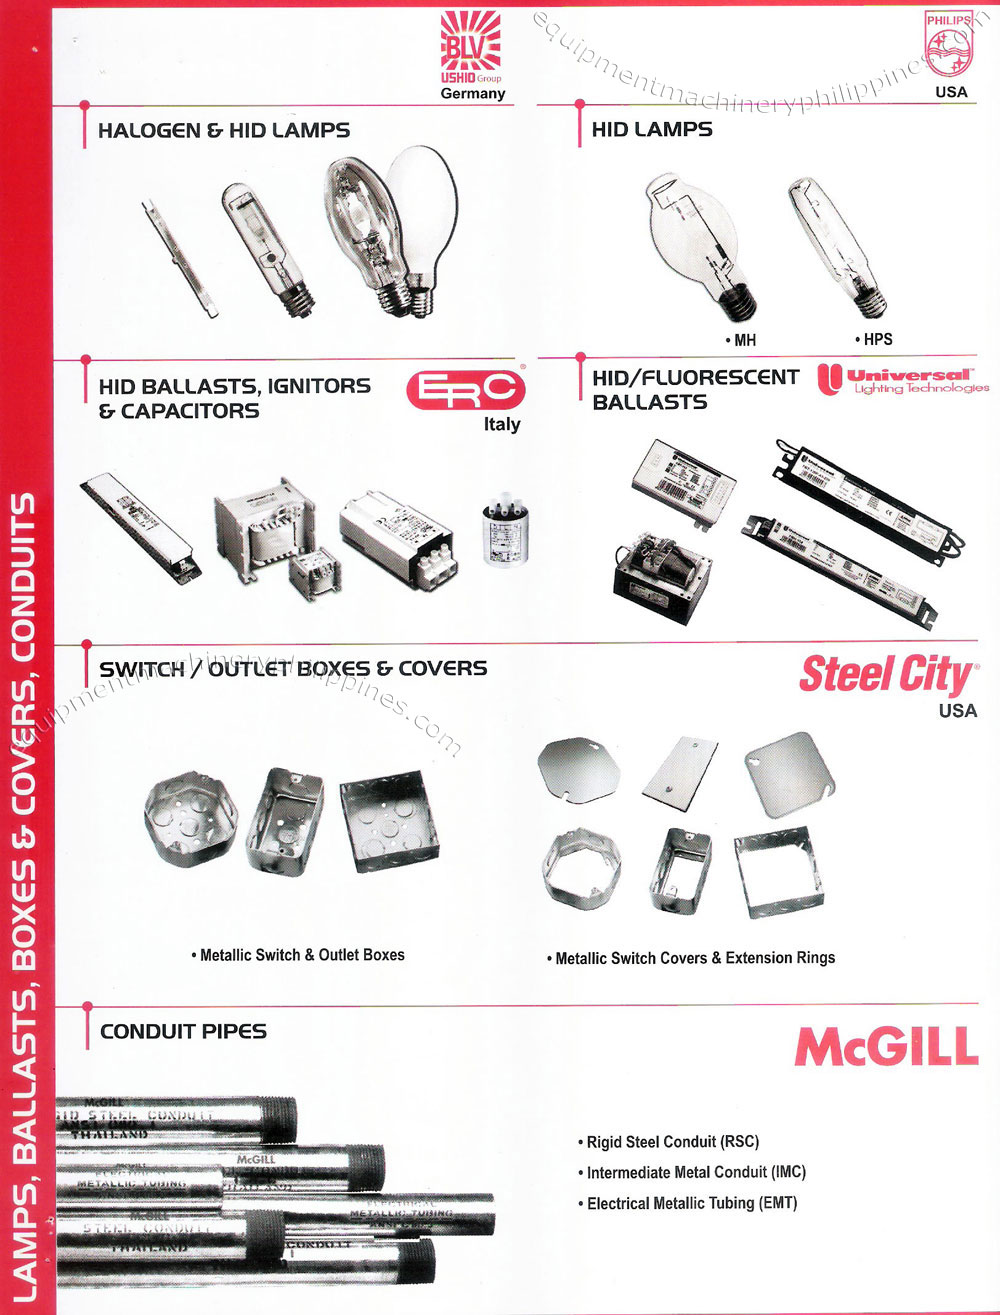 BLV Halogen and HID Lamps; Philips HID Lamps; ERC HID Ballasts, Ignitors, Capacitors; Universal HID Fluorescent Ballasts; Steel City Metallic Switch, Outlet Boxes and Covers; McGill Conduit Pipes